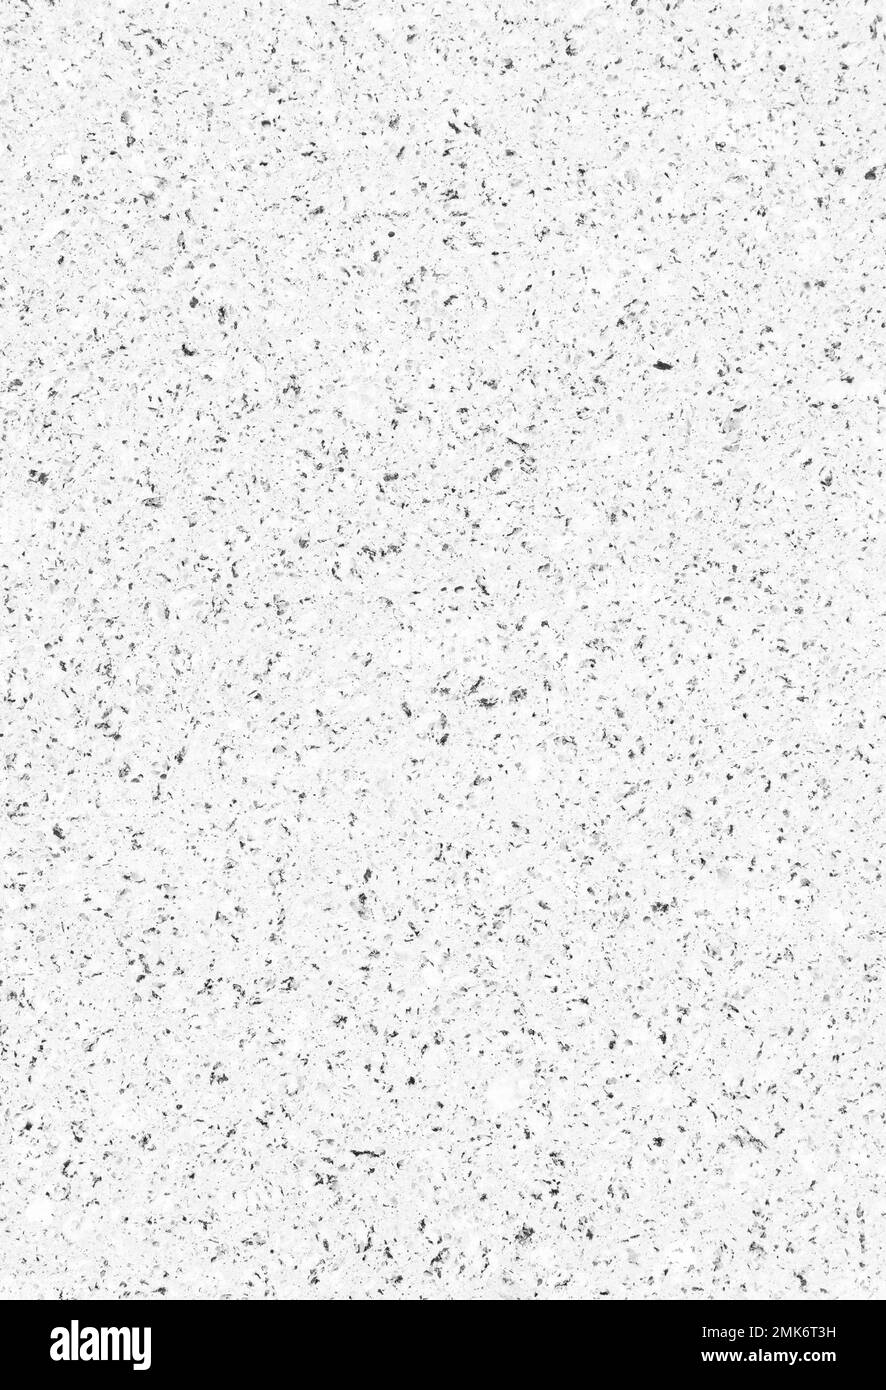 Close-up of a white wall or flooring made of concrete or cement and small stones. Abstract full frame textured background in black & white. Copy space Stock Photo